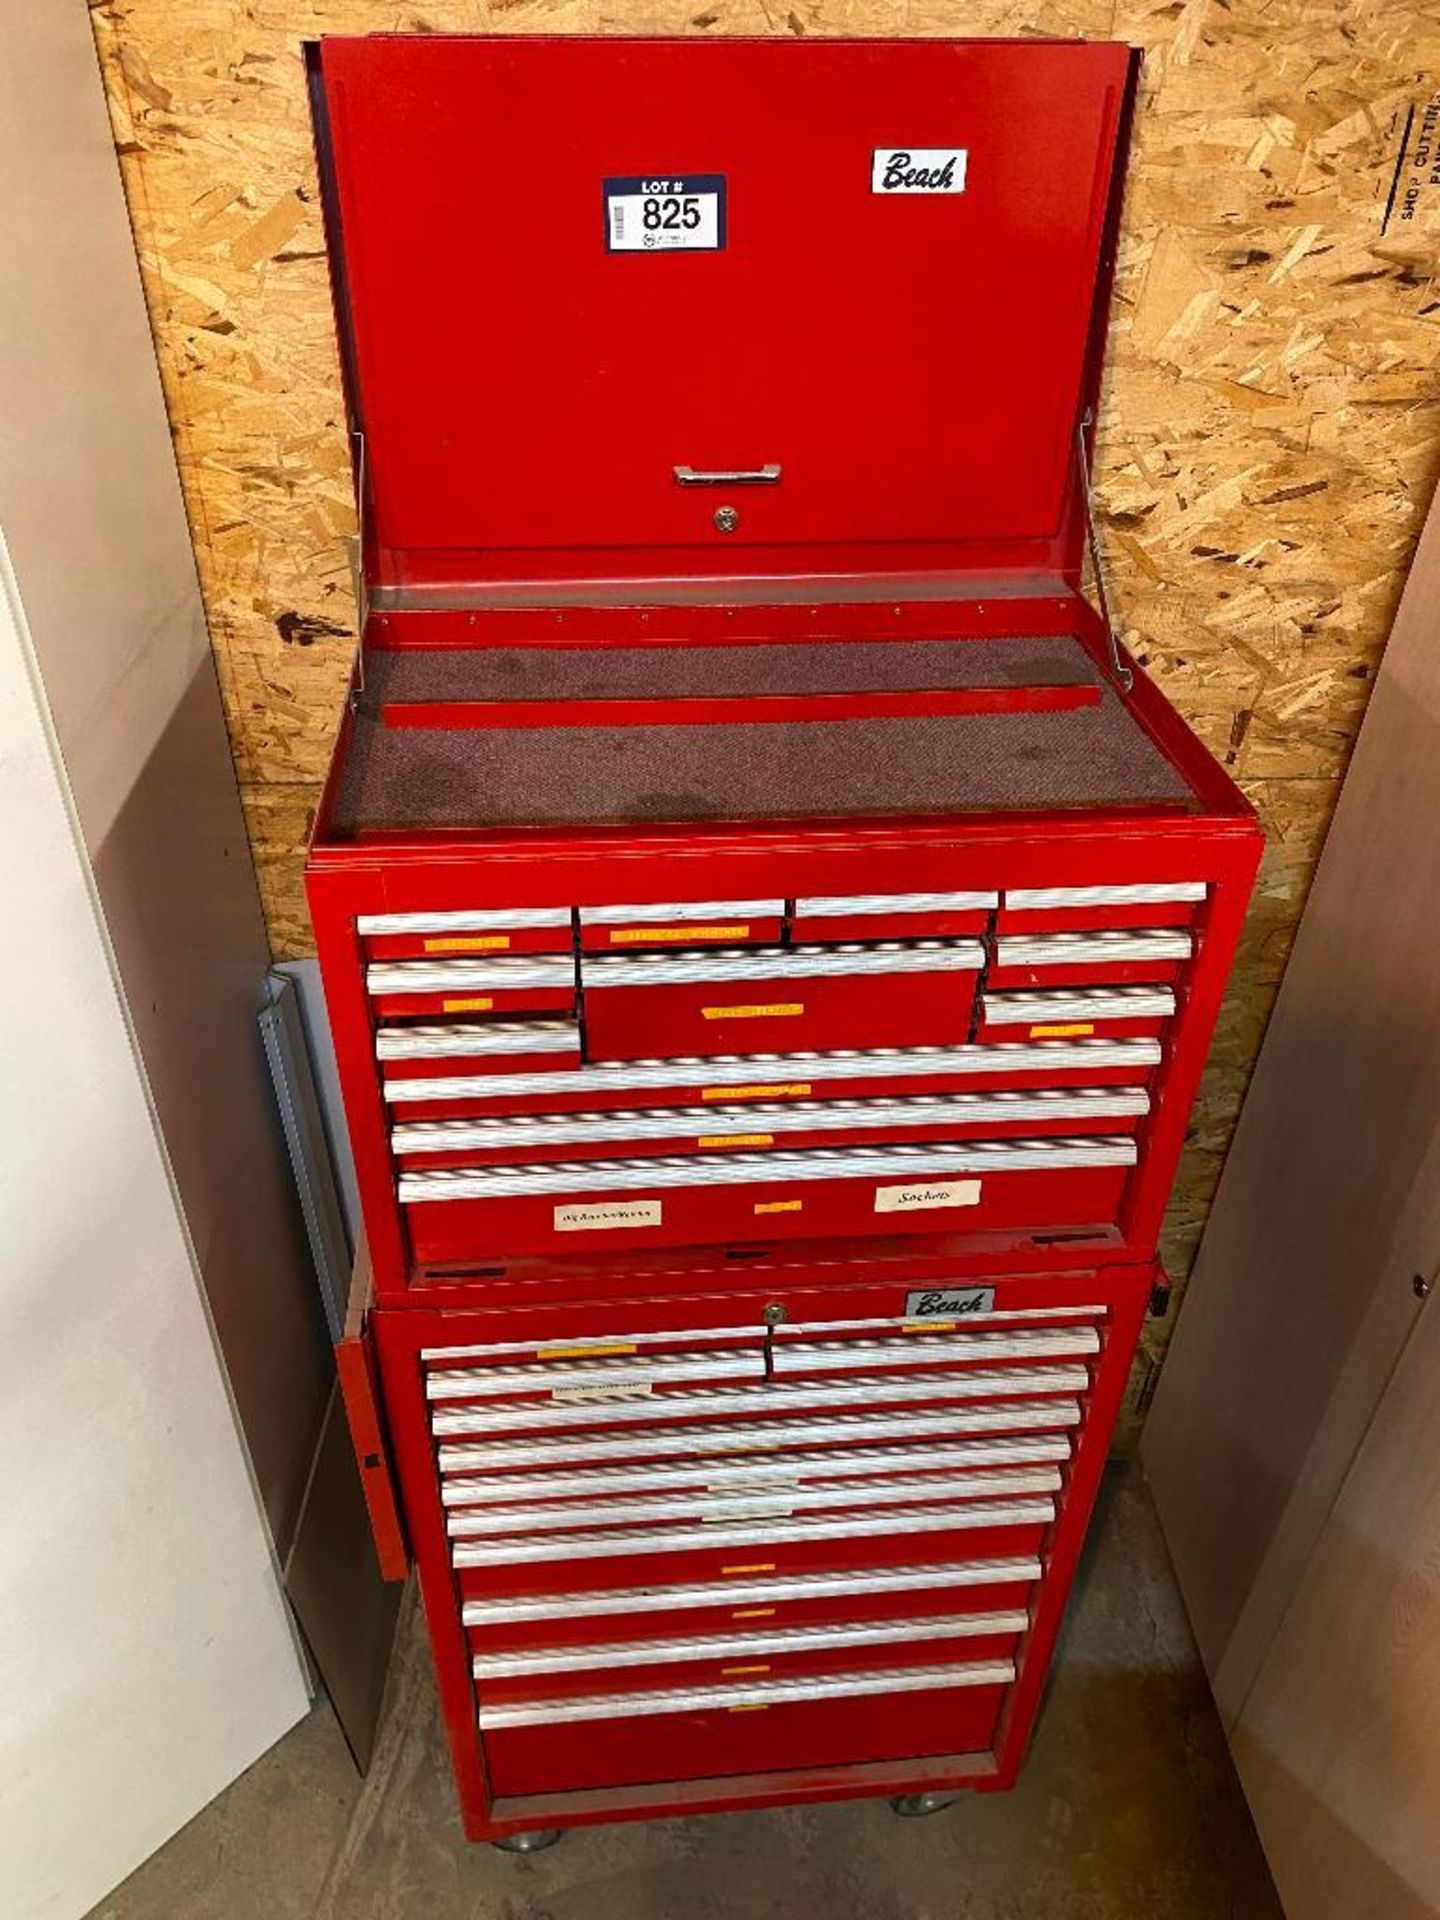 Beach 24-Drawer Mobile Tool Chest - Image 3 of 3